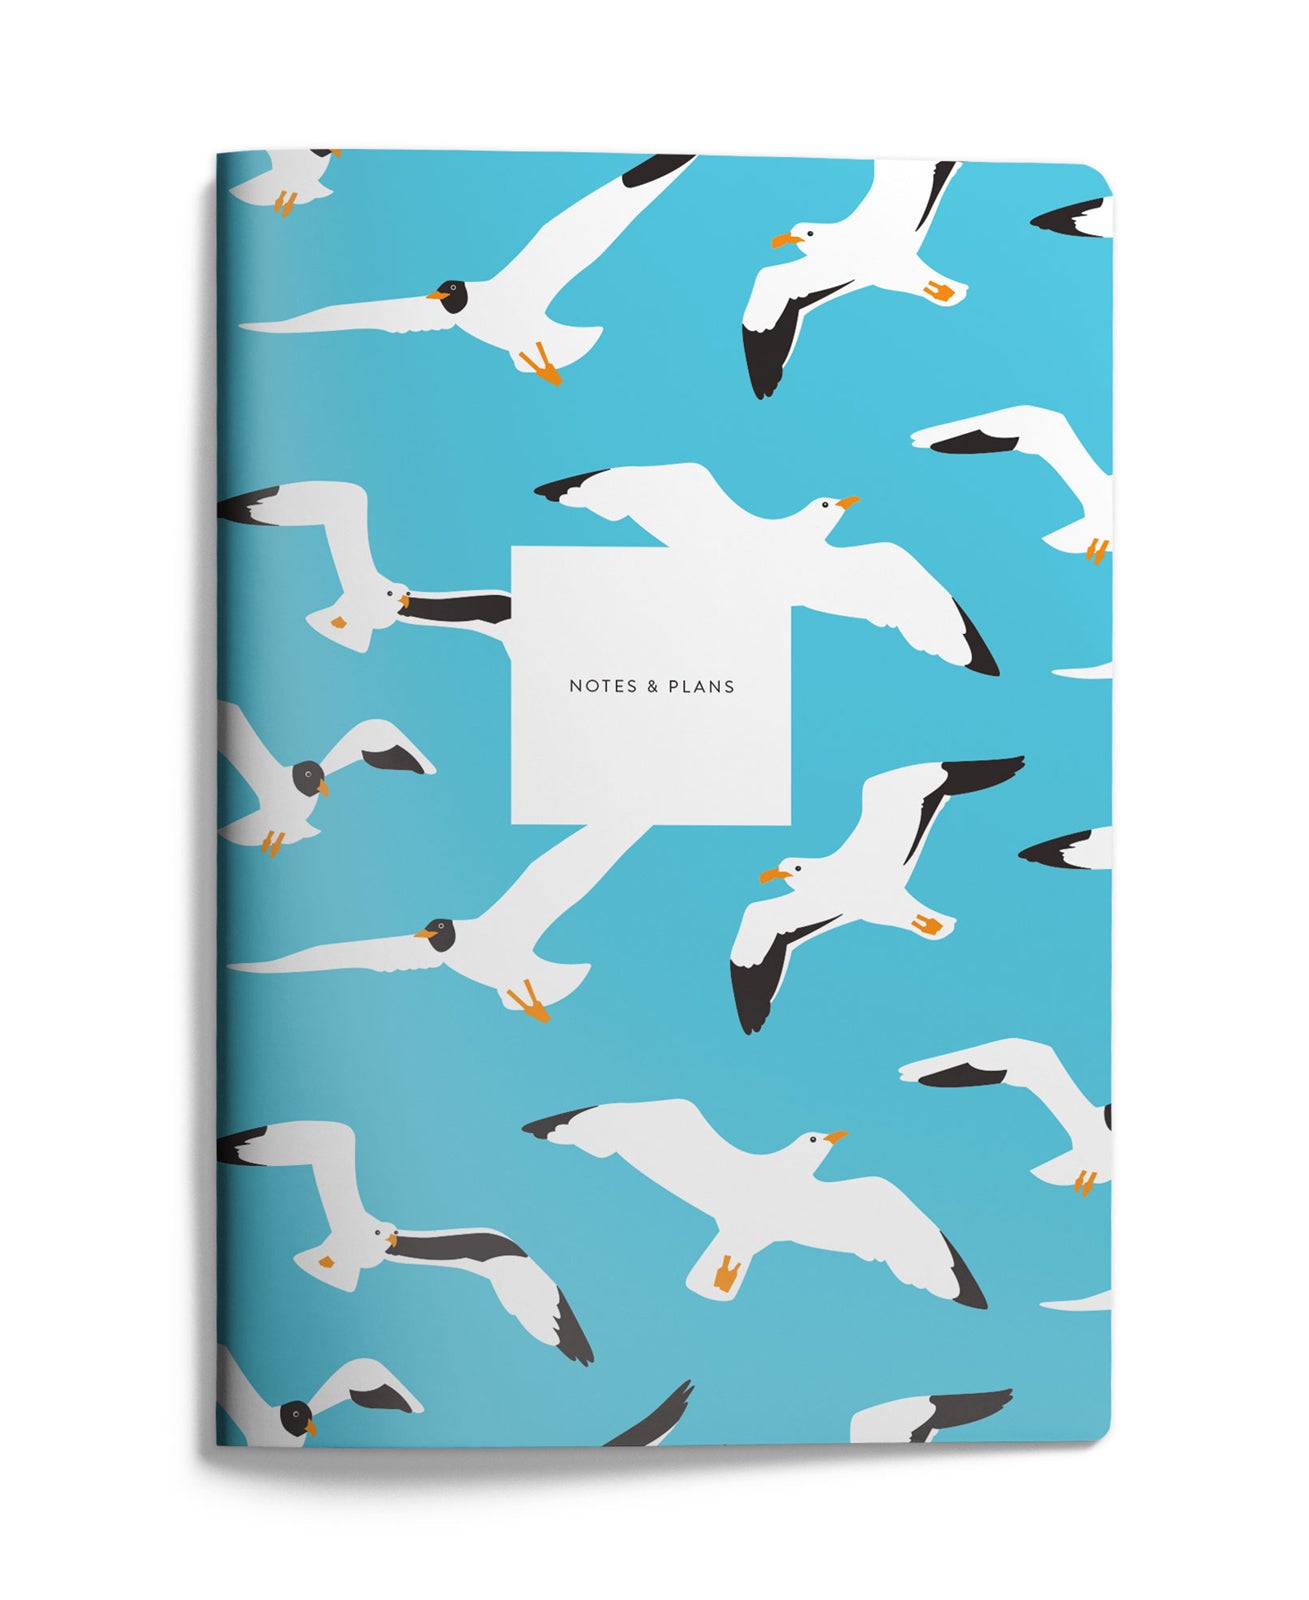 Lokit notebook, cover